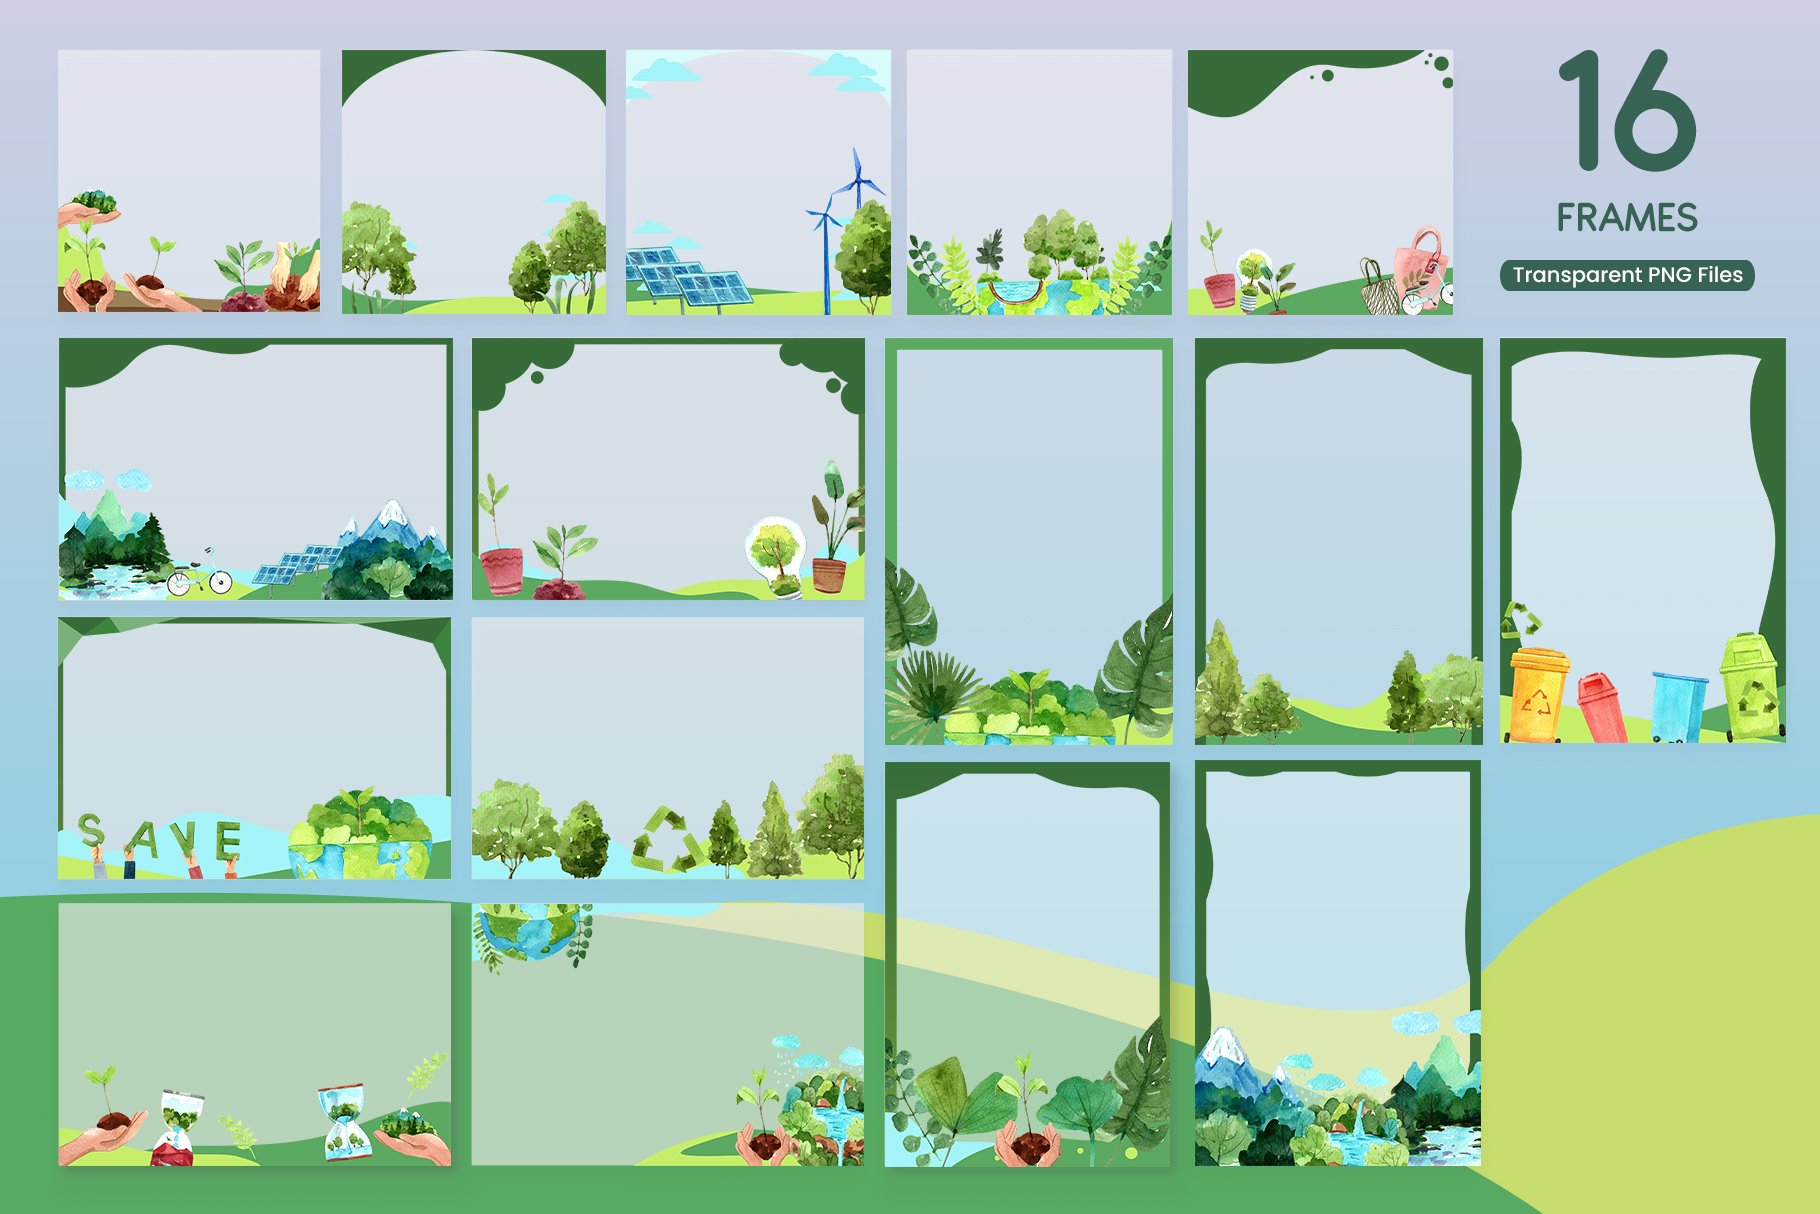 Frames in save the Earth style.